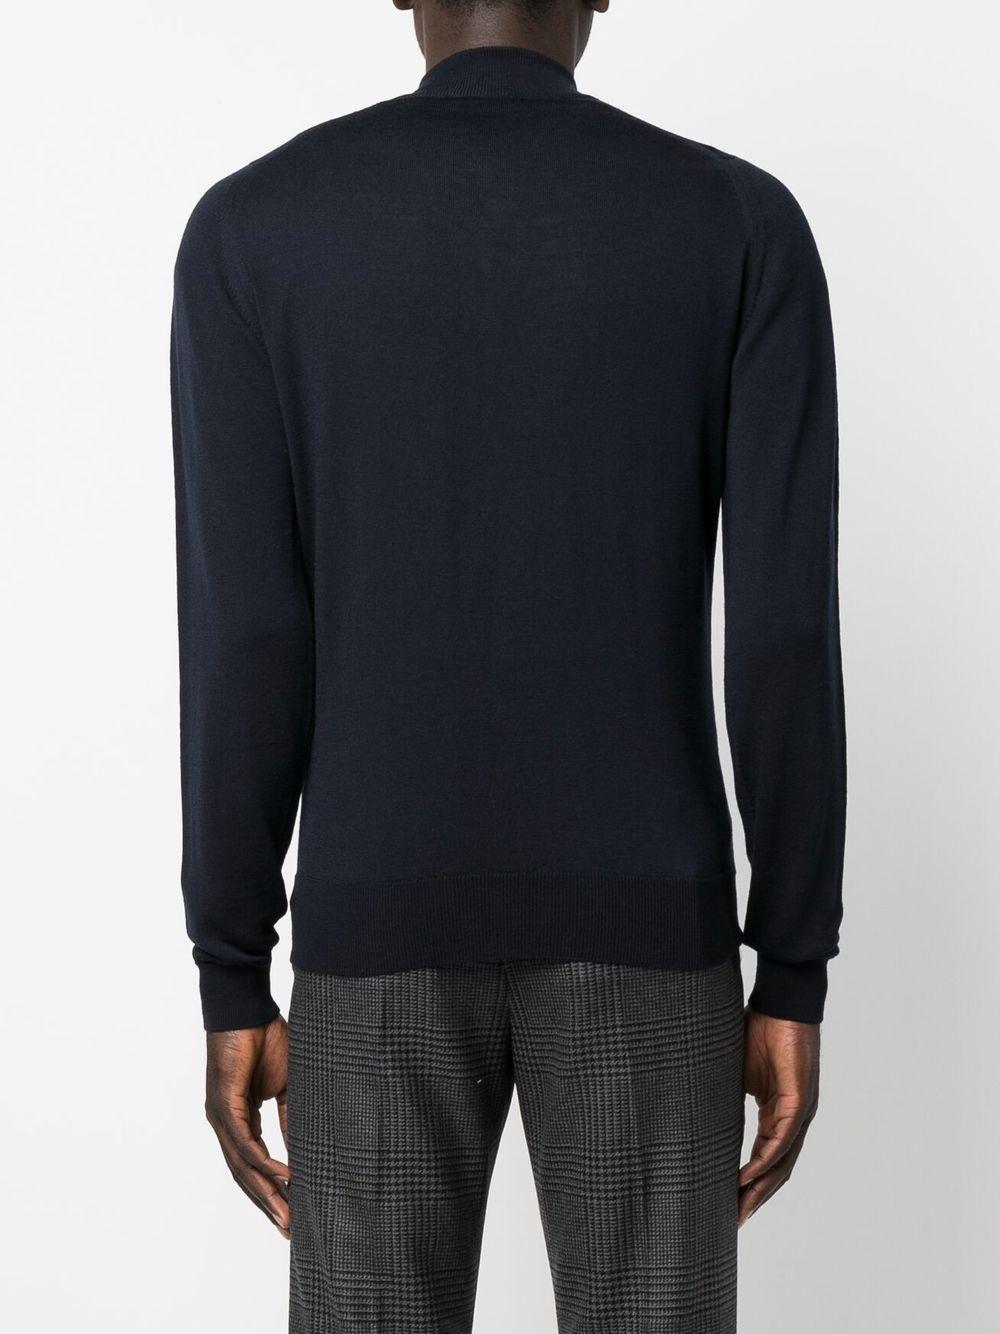 Mens Clothing Sweaters and knitwear Zipped sweaters John Smedley Wool Maglia Full Zip in Black for Men 